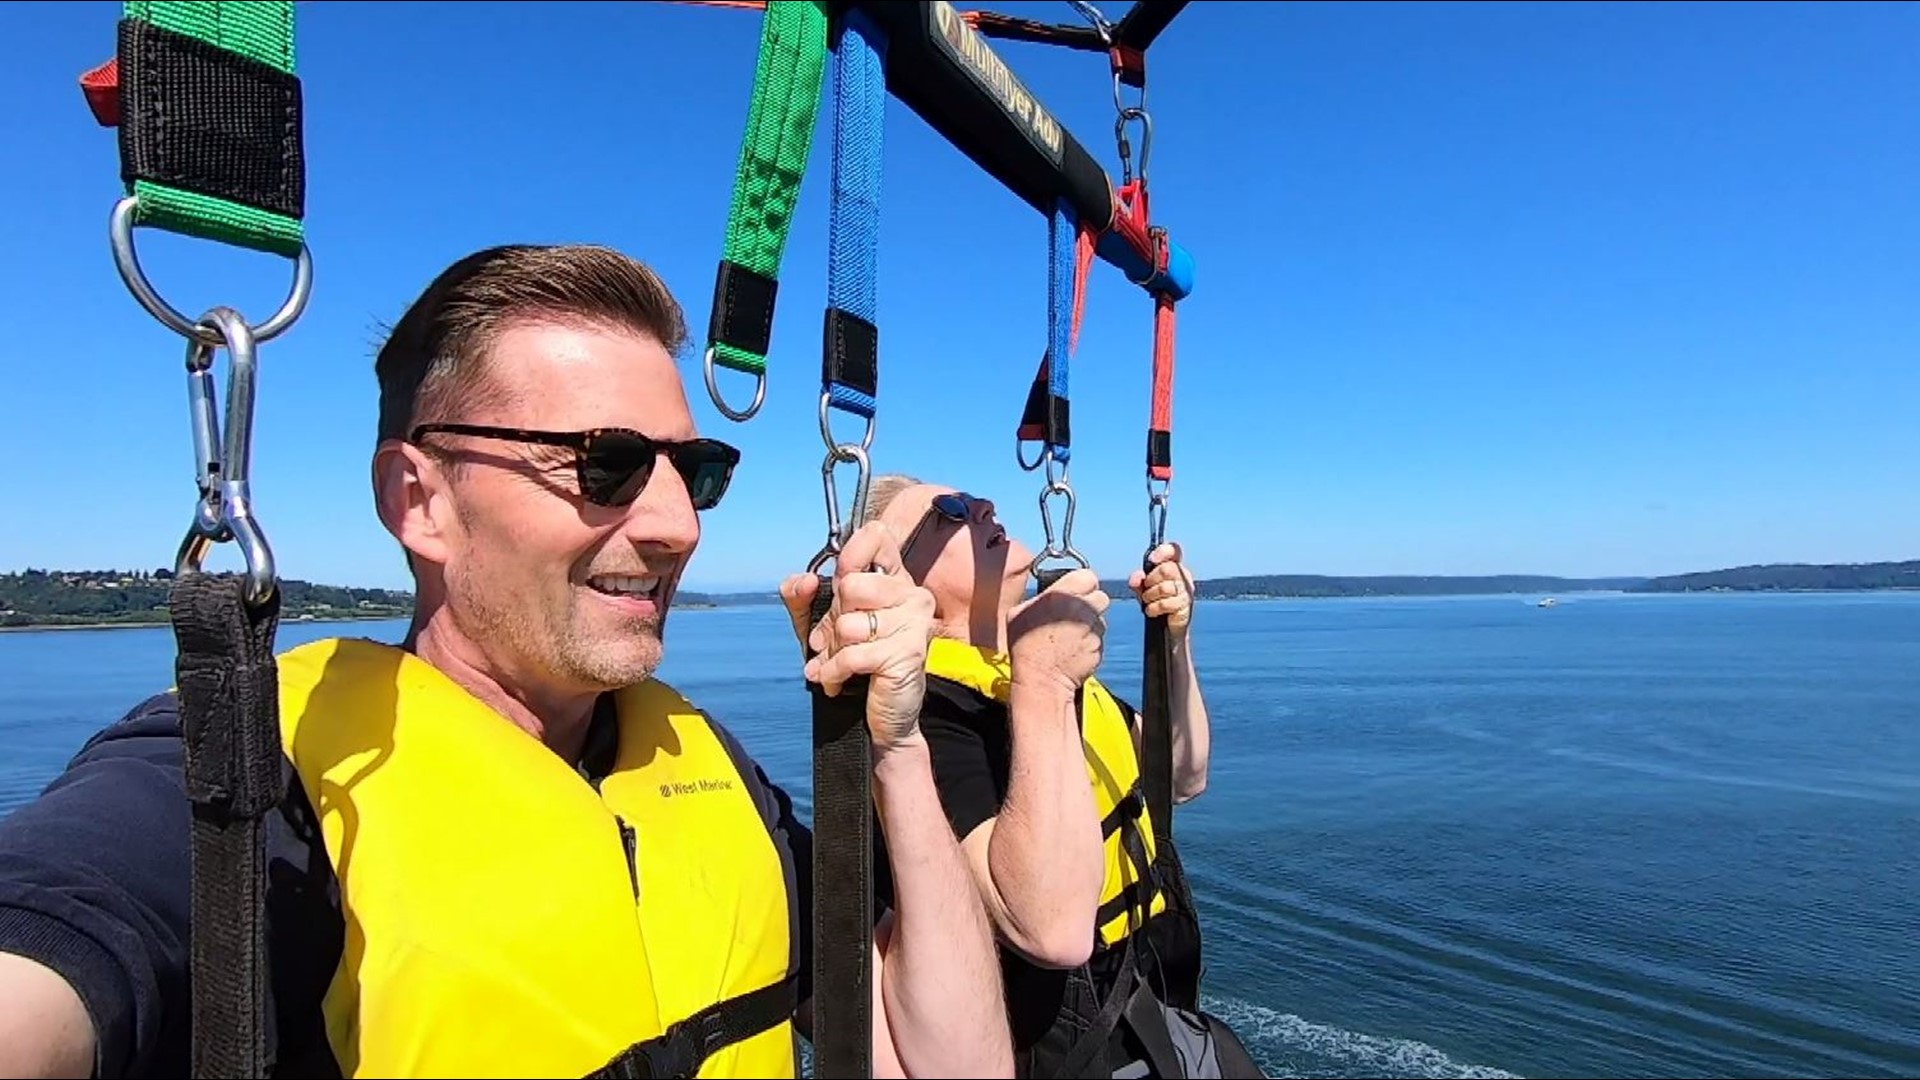 Sailing hundreds of feet above the water may not be for everyone. We're looking at you, Jim Dever! #k5evening